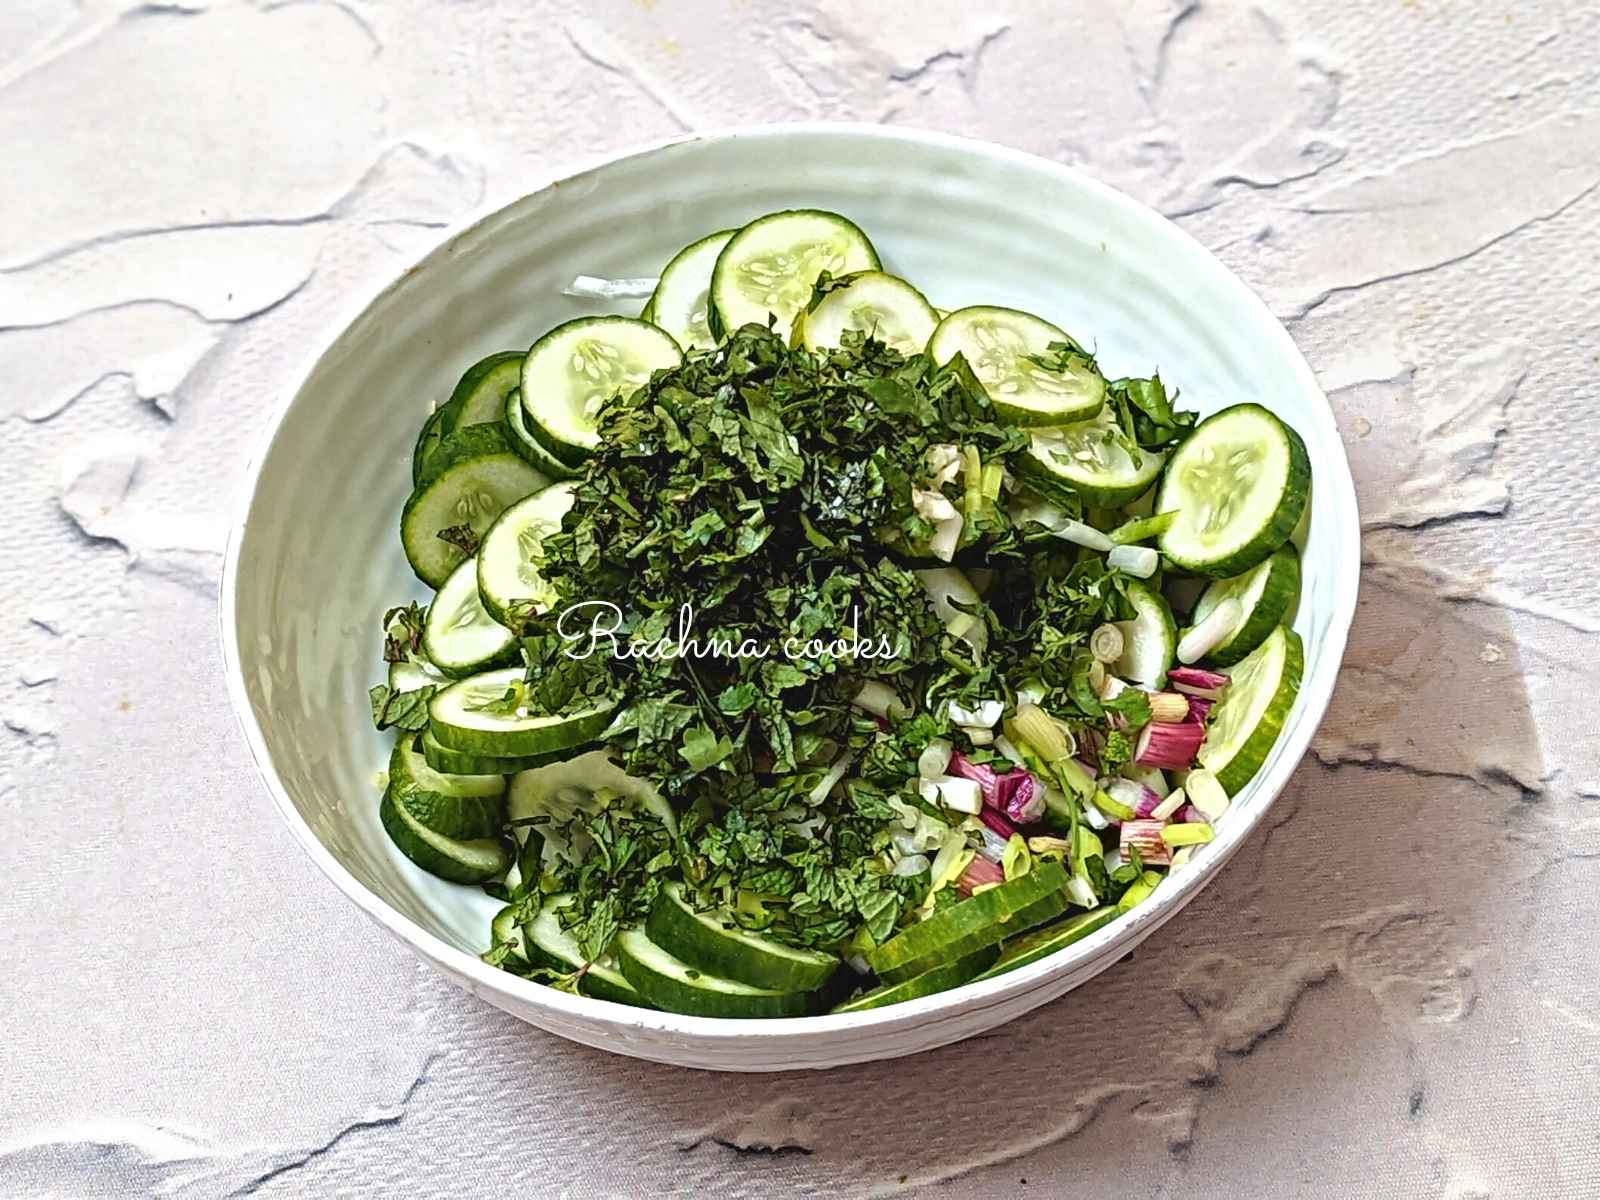 Sliced cucumber, scallions, mint and cilantro in a bowl.